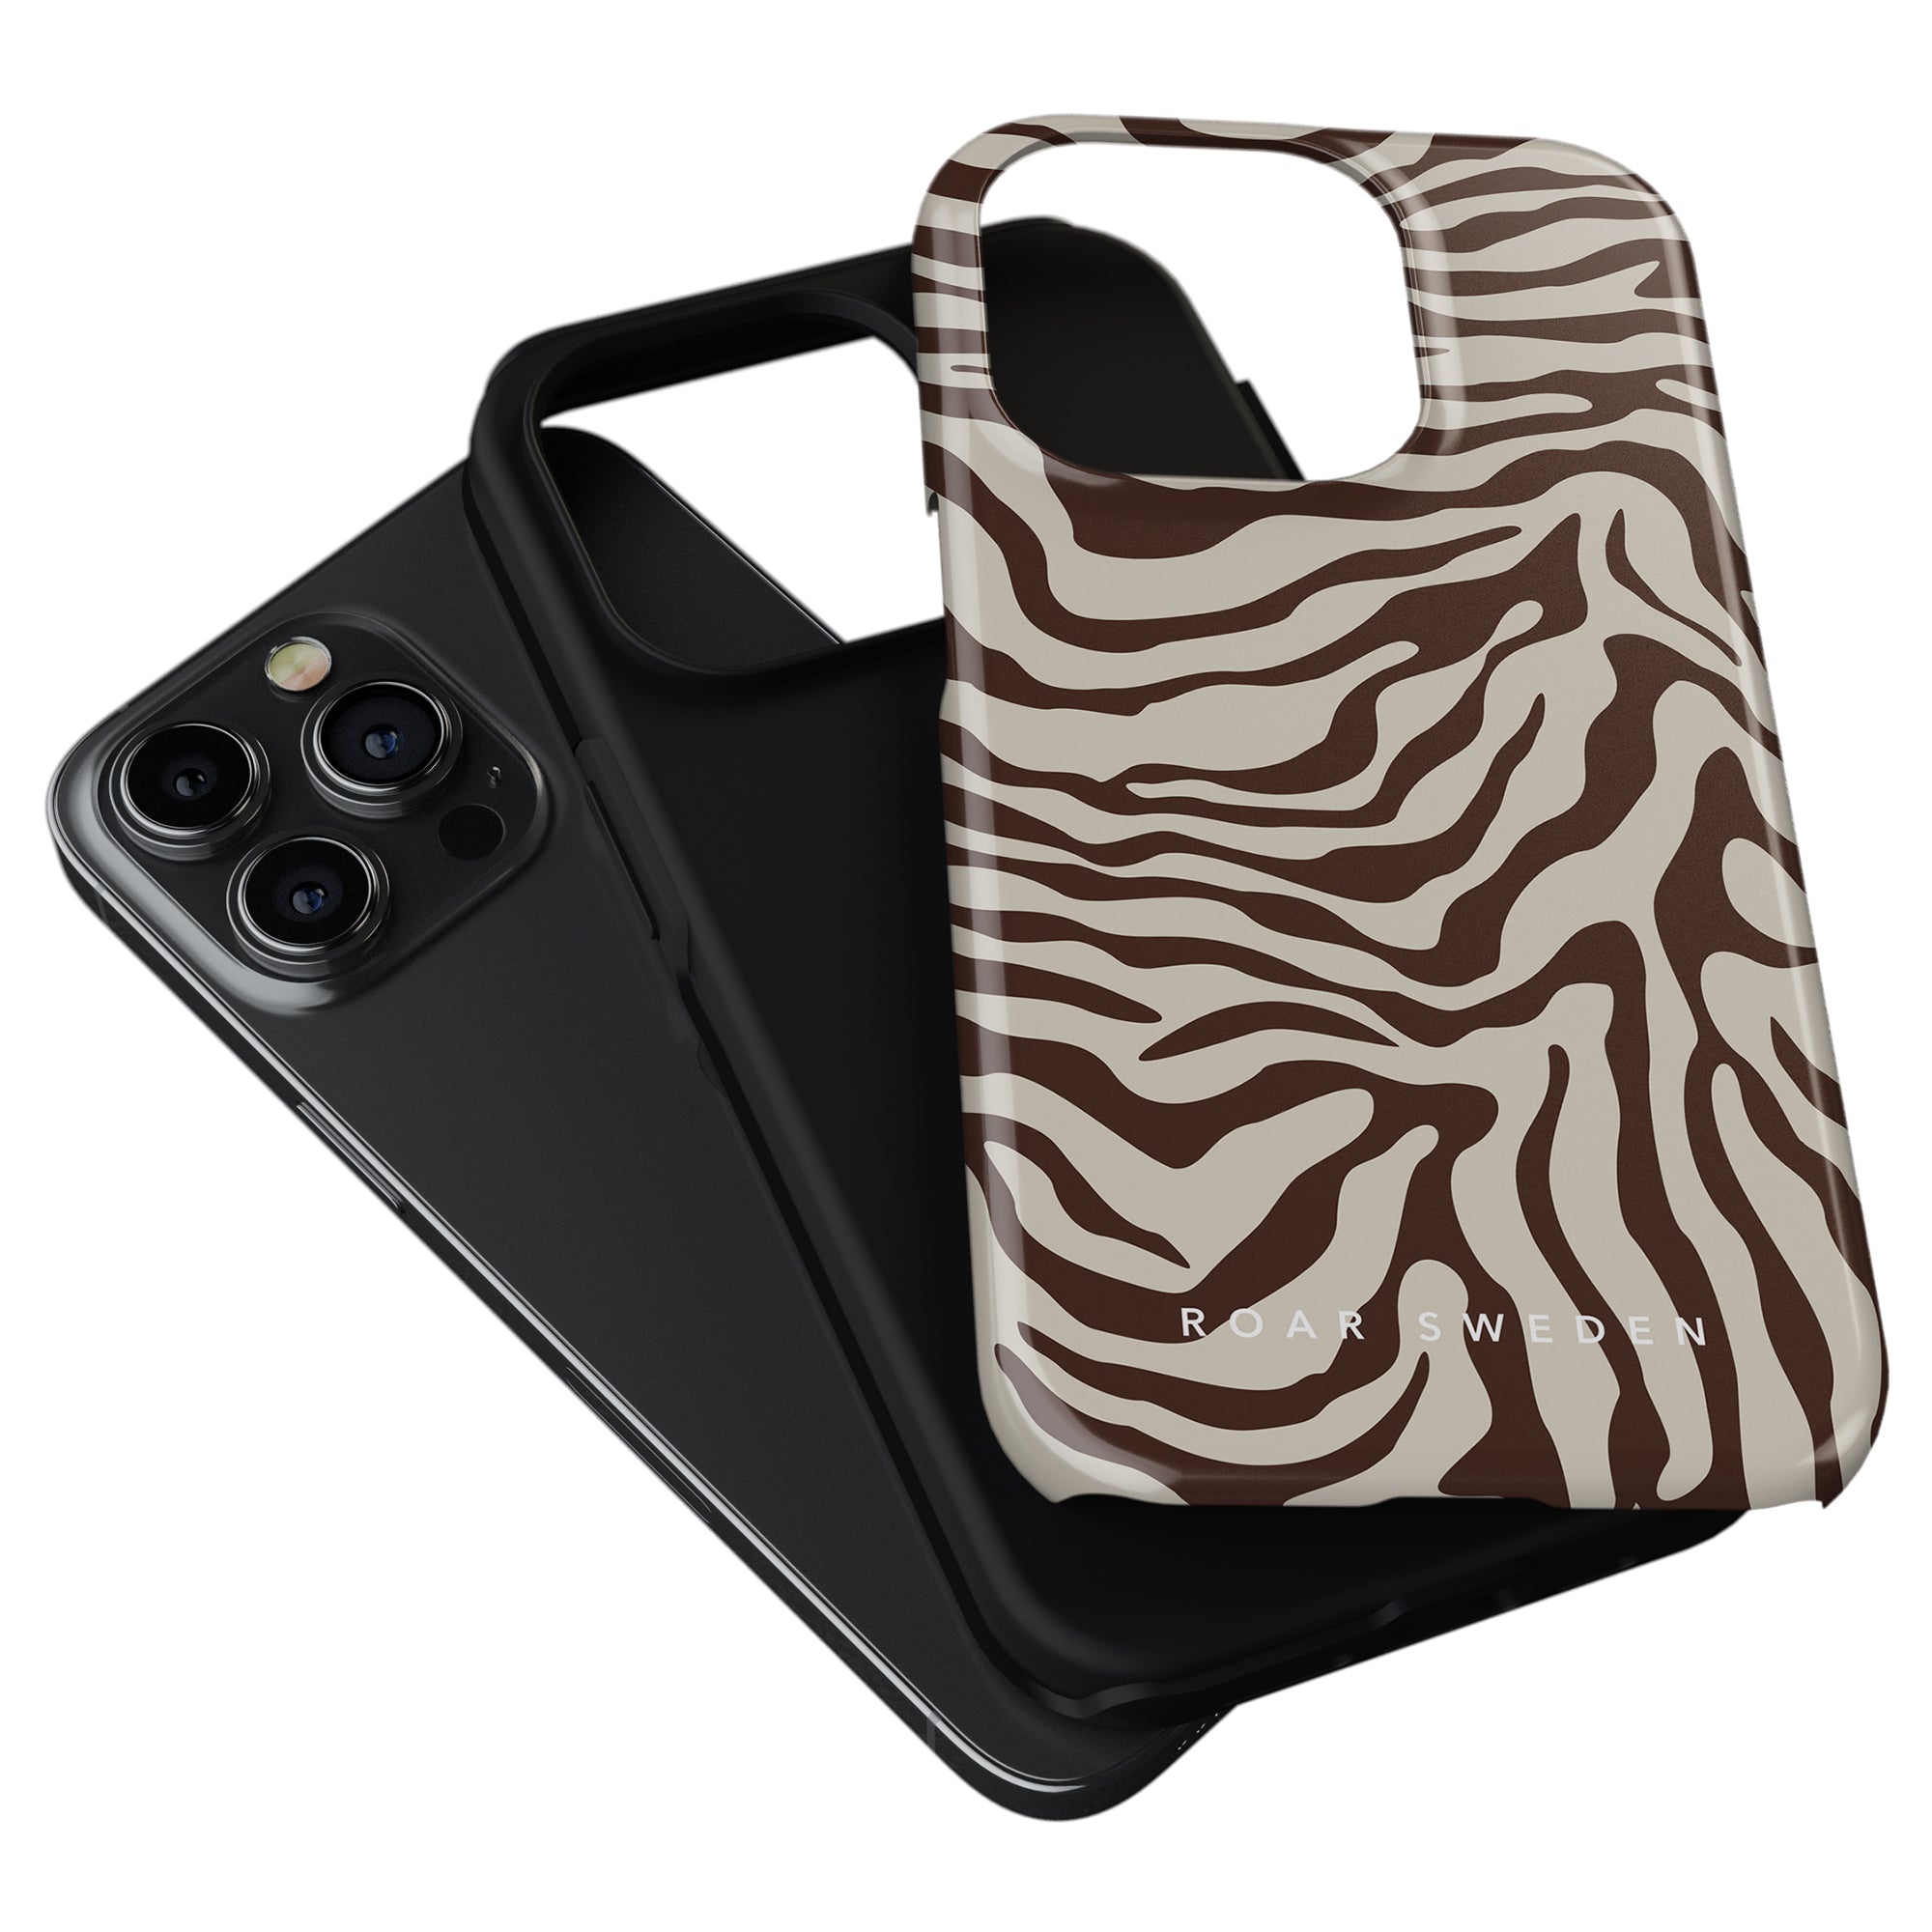 Two smartphones with Mocha - Tough Cases on a white background; one has a black case and triple camera setup, the other a zebra kollektion case and brand logo "roar sweden".